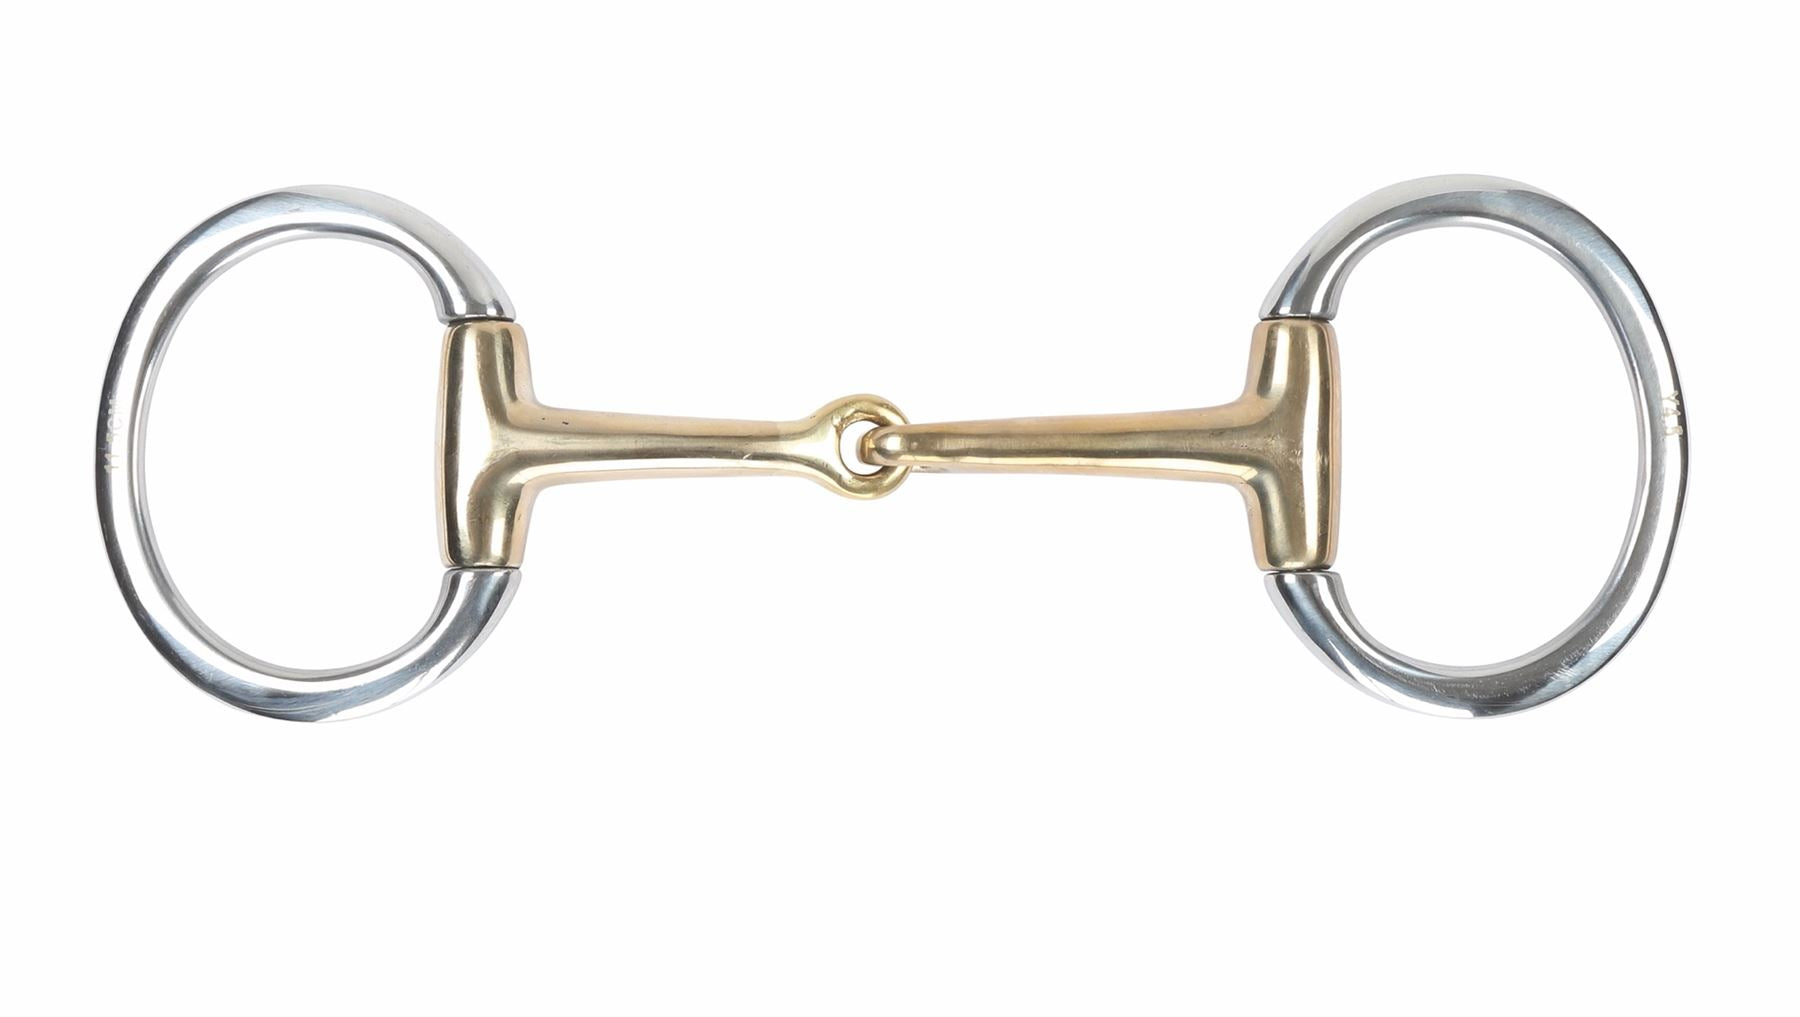 Shires Brass Alloy Flat Ring Jointed Eggbutt - Just Horse Riders